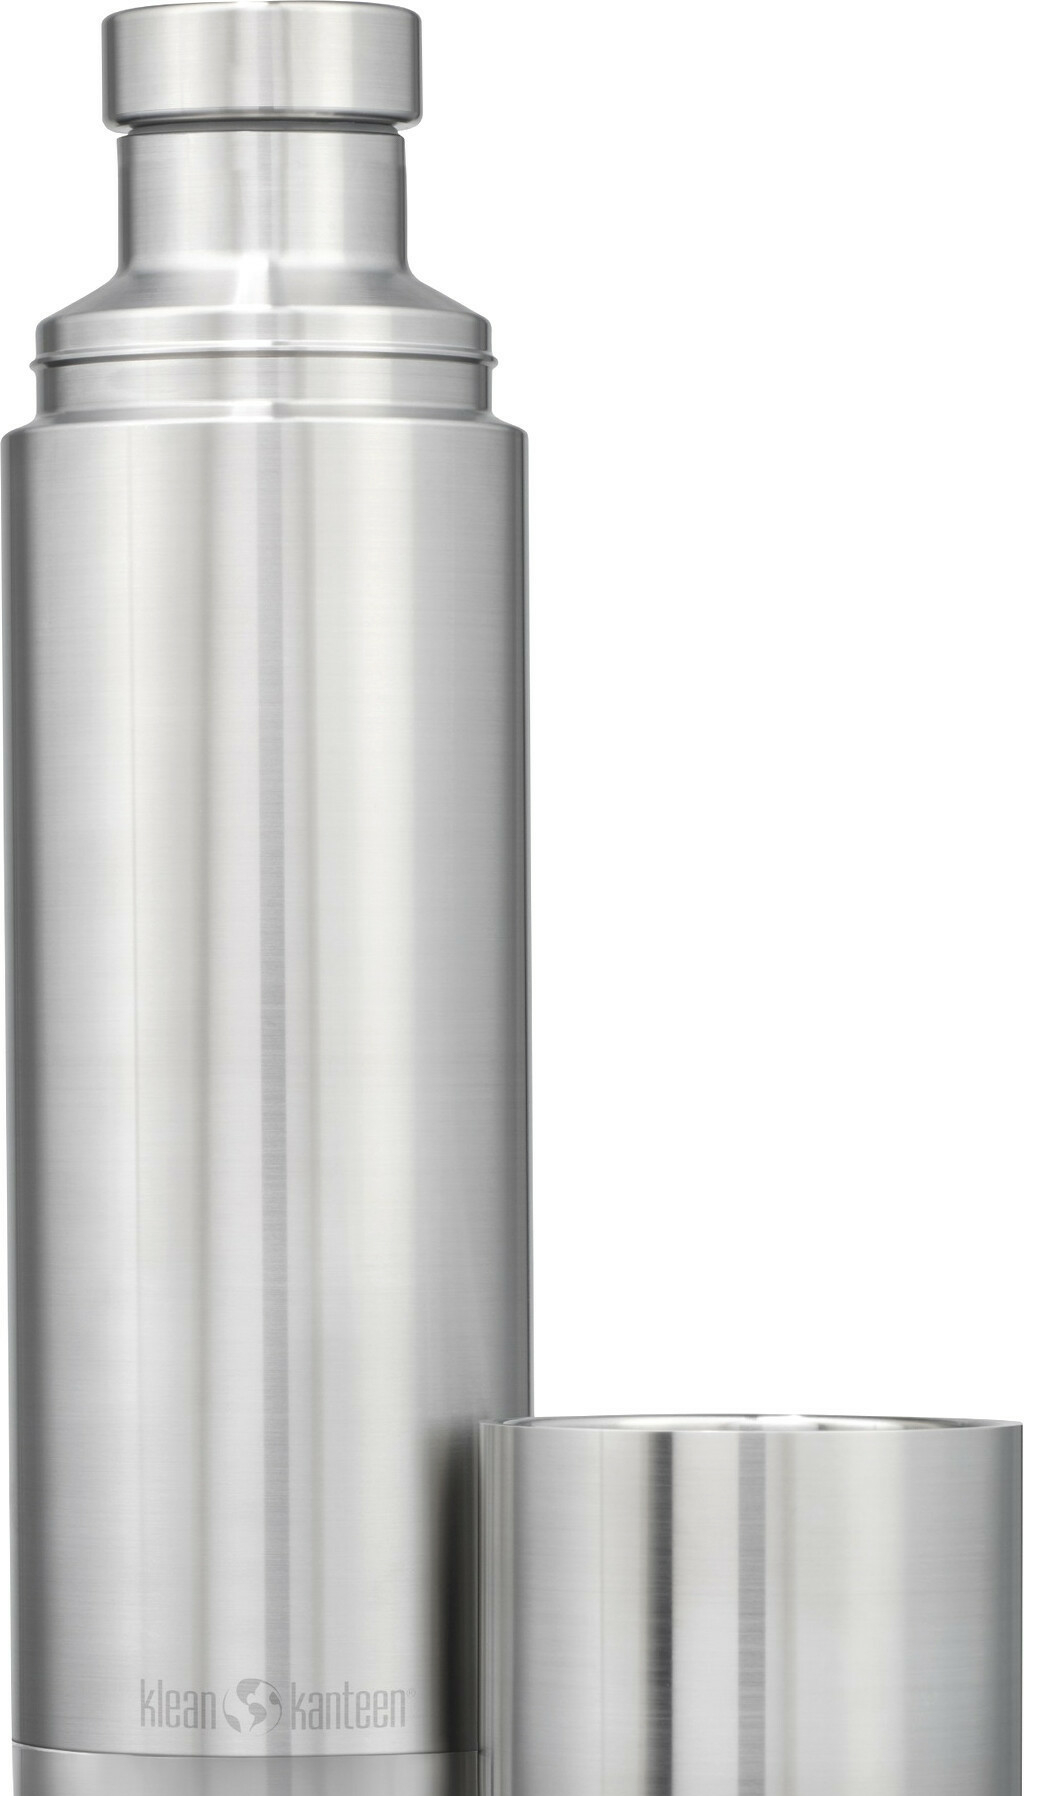 Термос Klean Kanteen Insulated TKPro Brushed Stainless 1009465 1000 мл